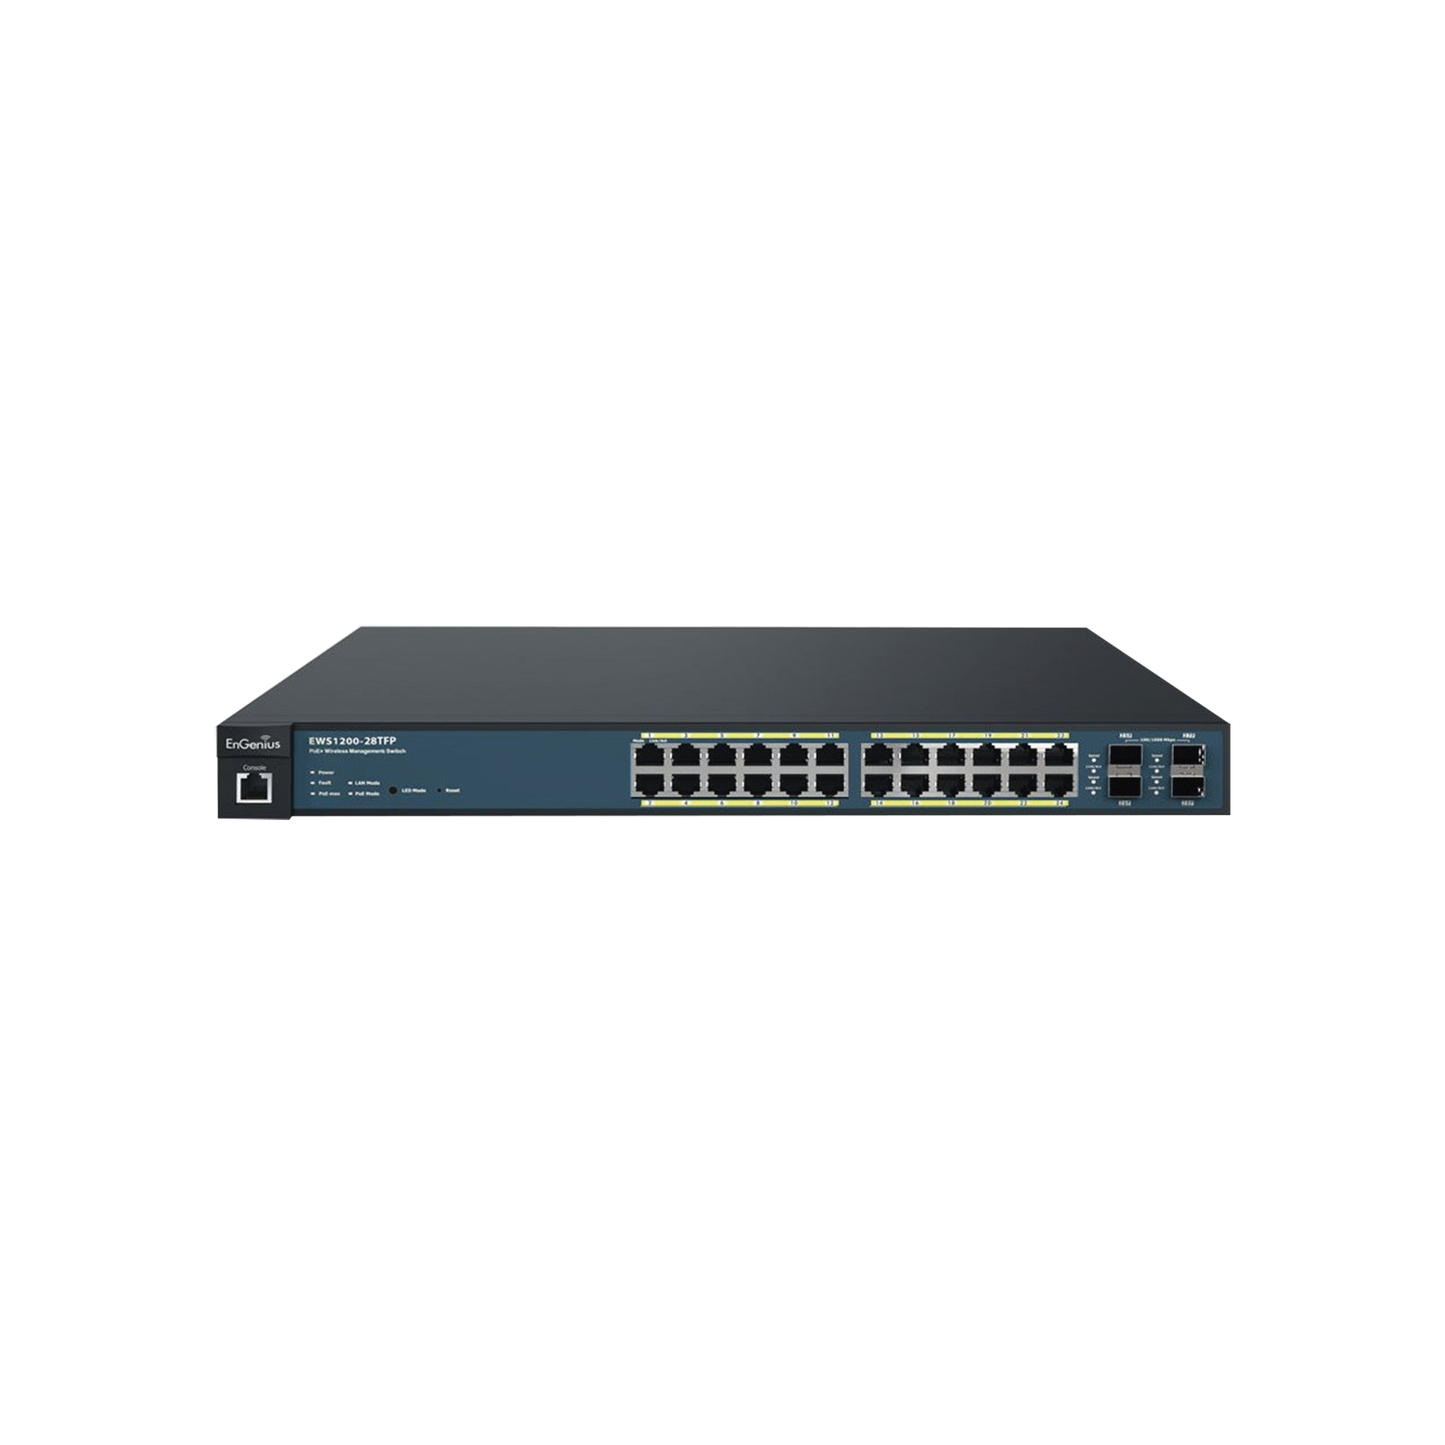 PoE Switch with 24 Gigabit Ports and 4 SFP Ports, Supports up to 410 W, with Controller Option for Neutron and Enturbo Series